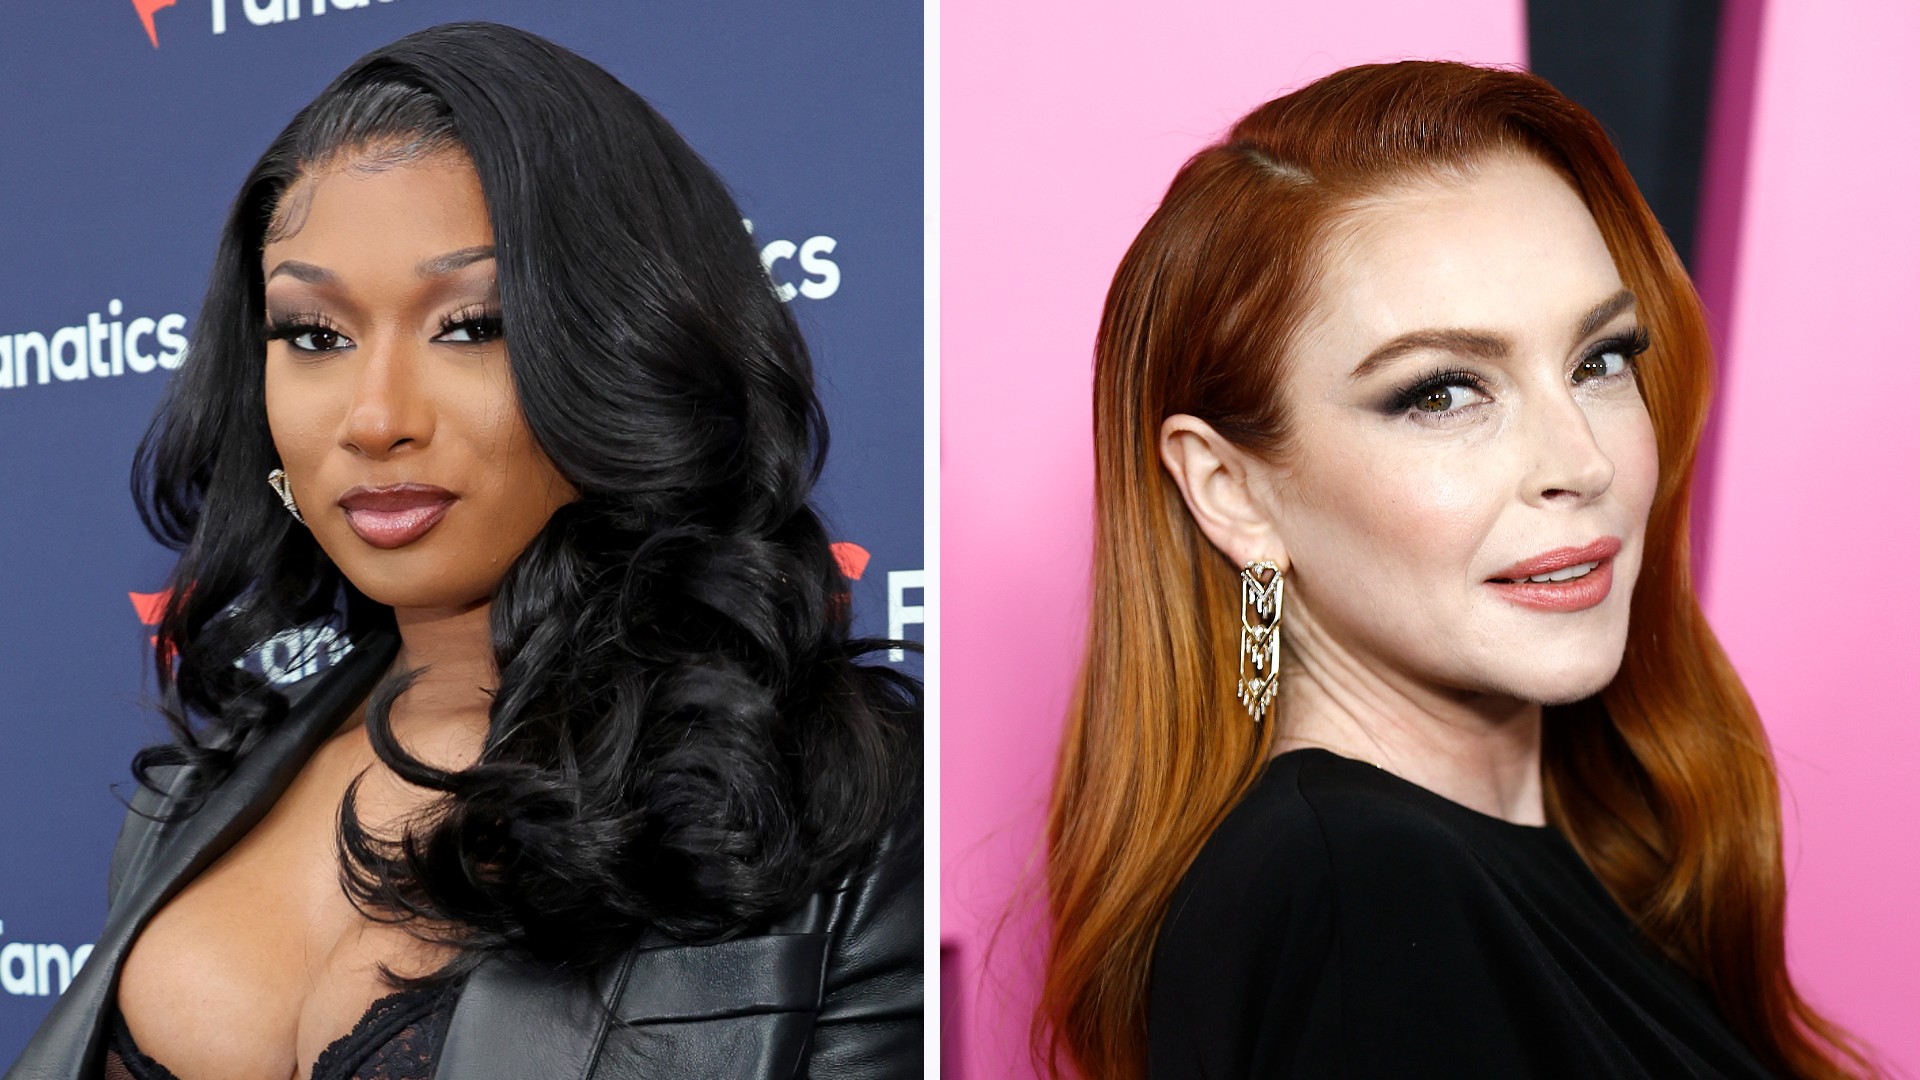 Megan Thee Stallion 'Mean Girls' Cameo Leads To Digital Release Edits Over Lindsay Lohan's Outcry Against "Fire Crotch" Remark